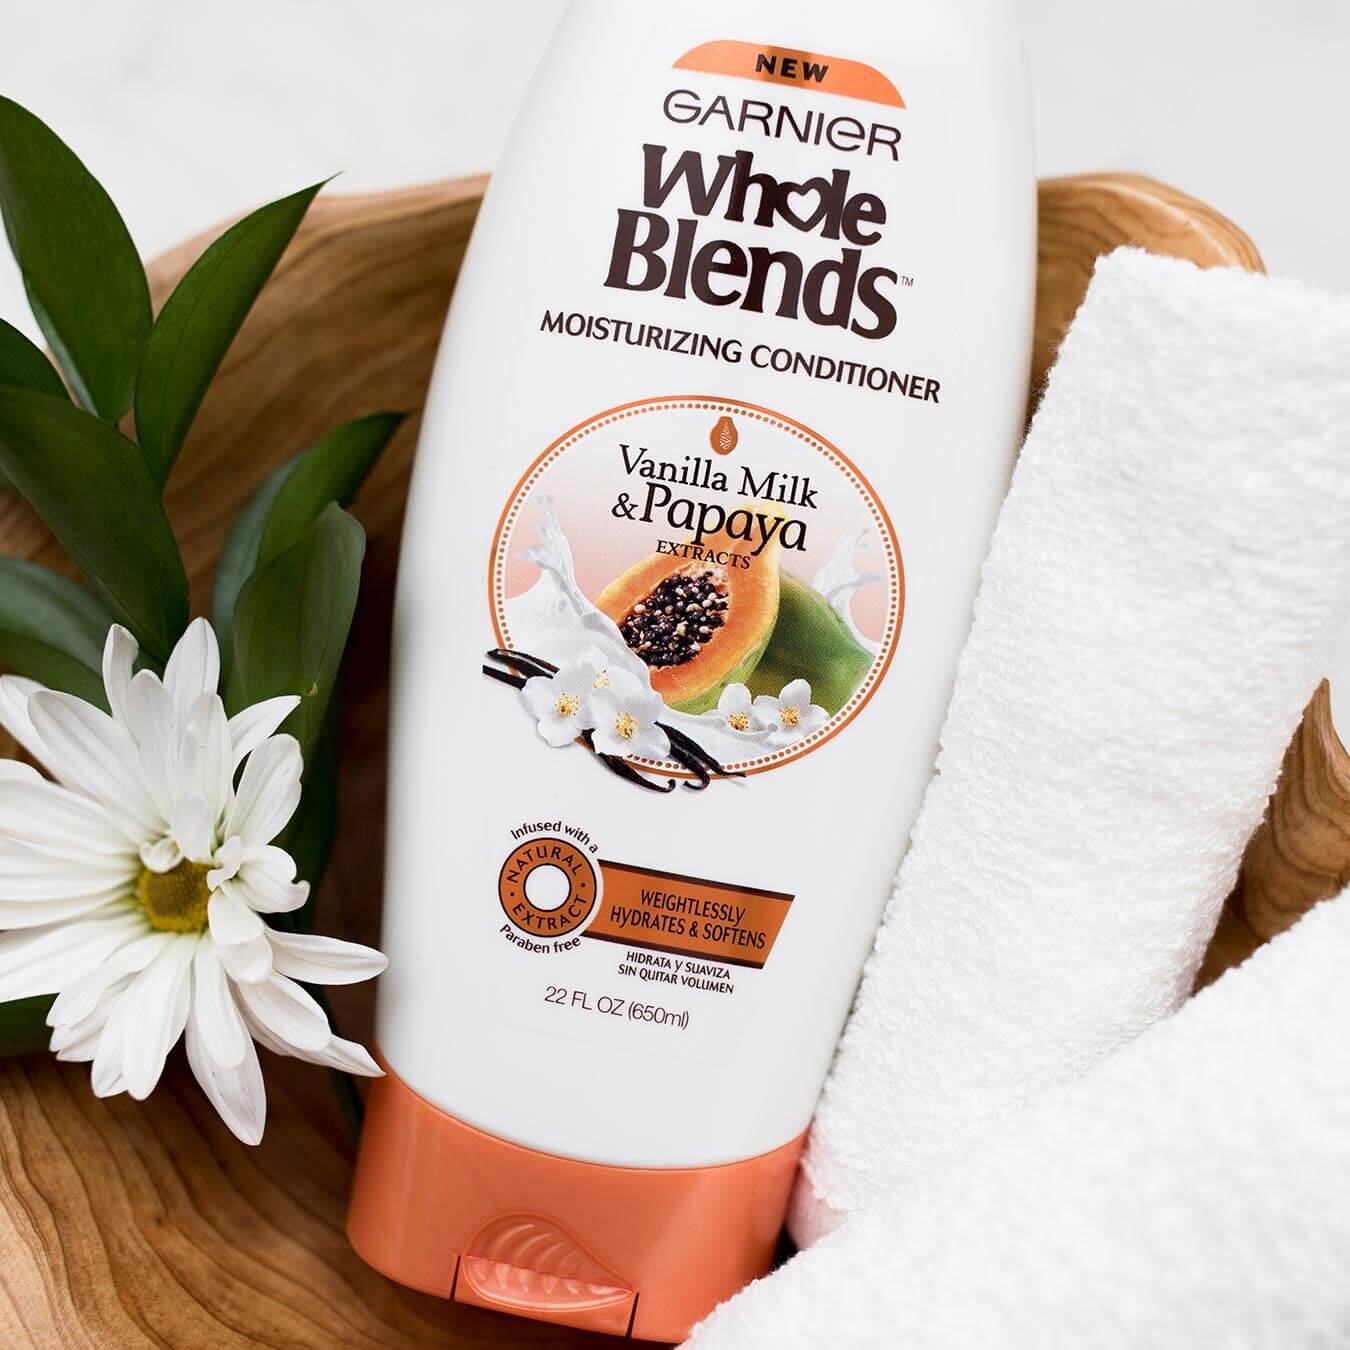 Whole Blends Vanilla Milk and Papaya Moisturizing Conditioner in an irregular wooden bowl next to some leaves, a daisy blossom, and two rolled white hand towels.